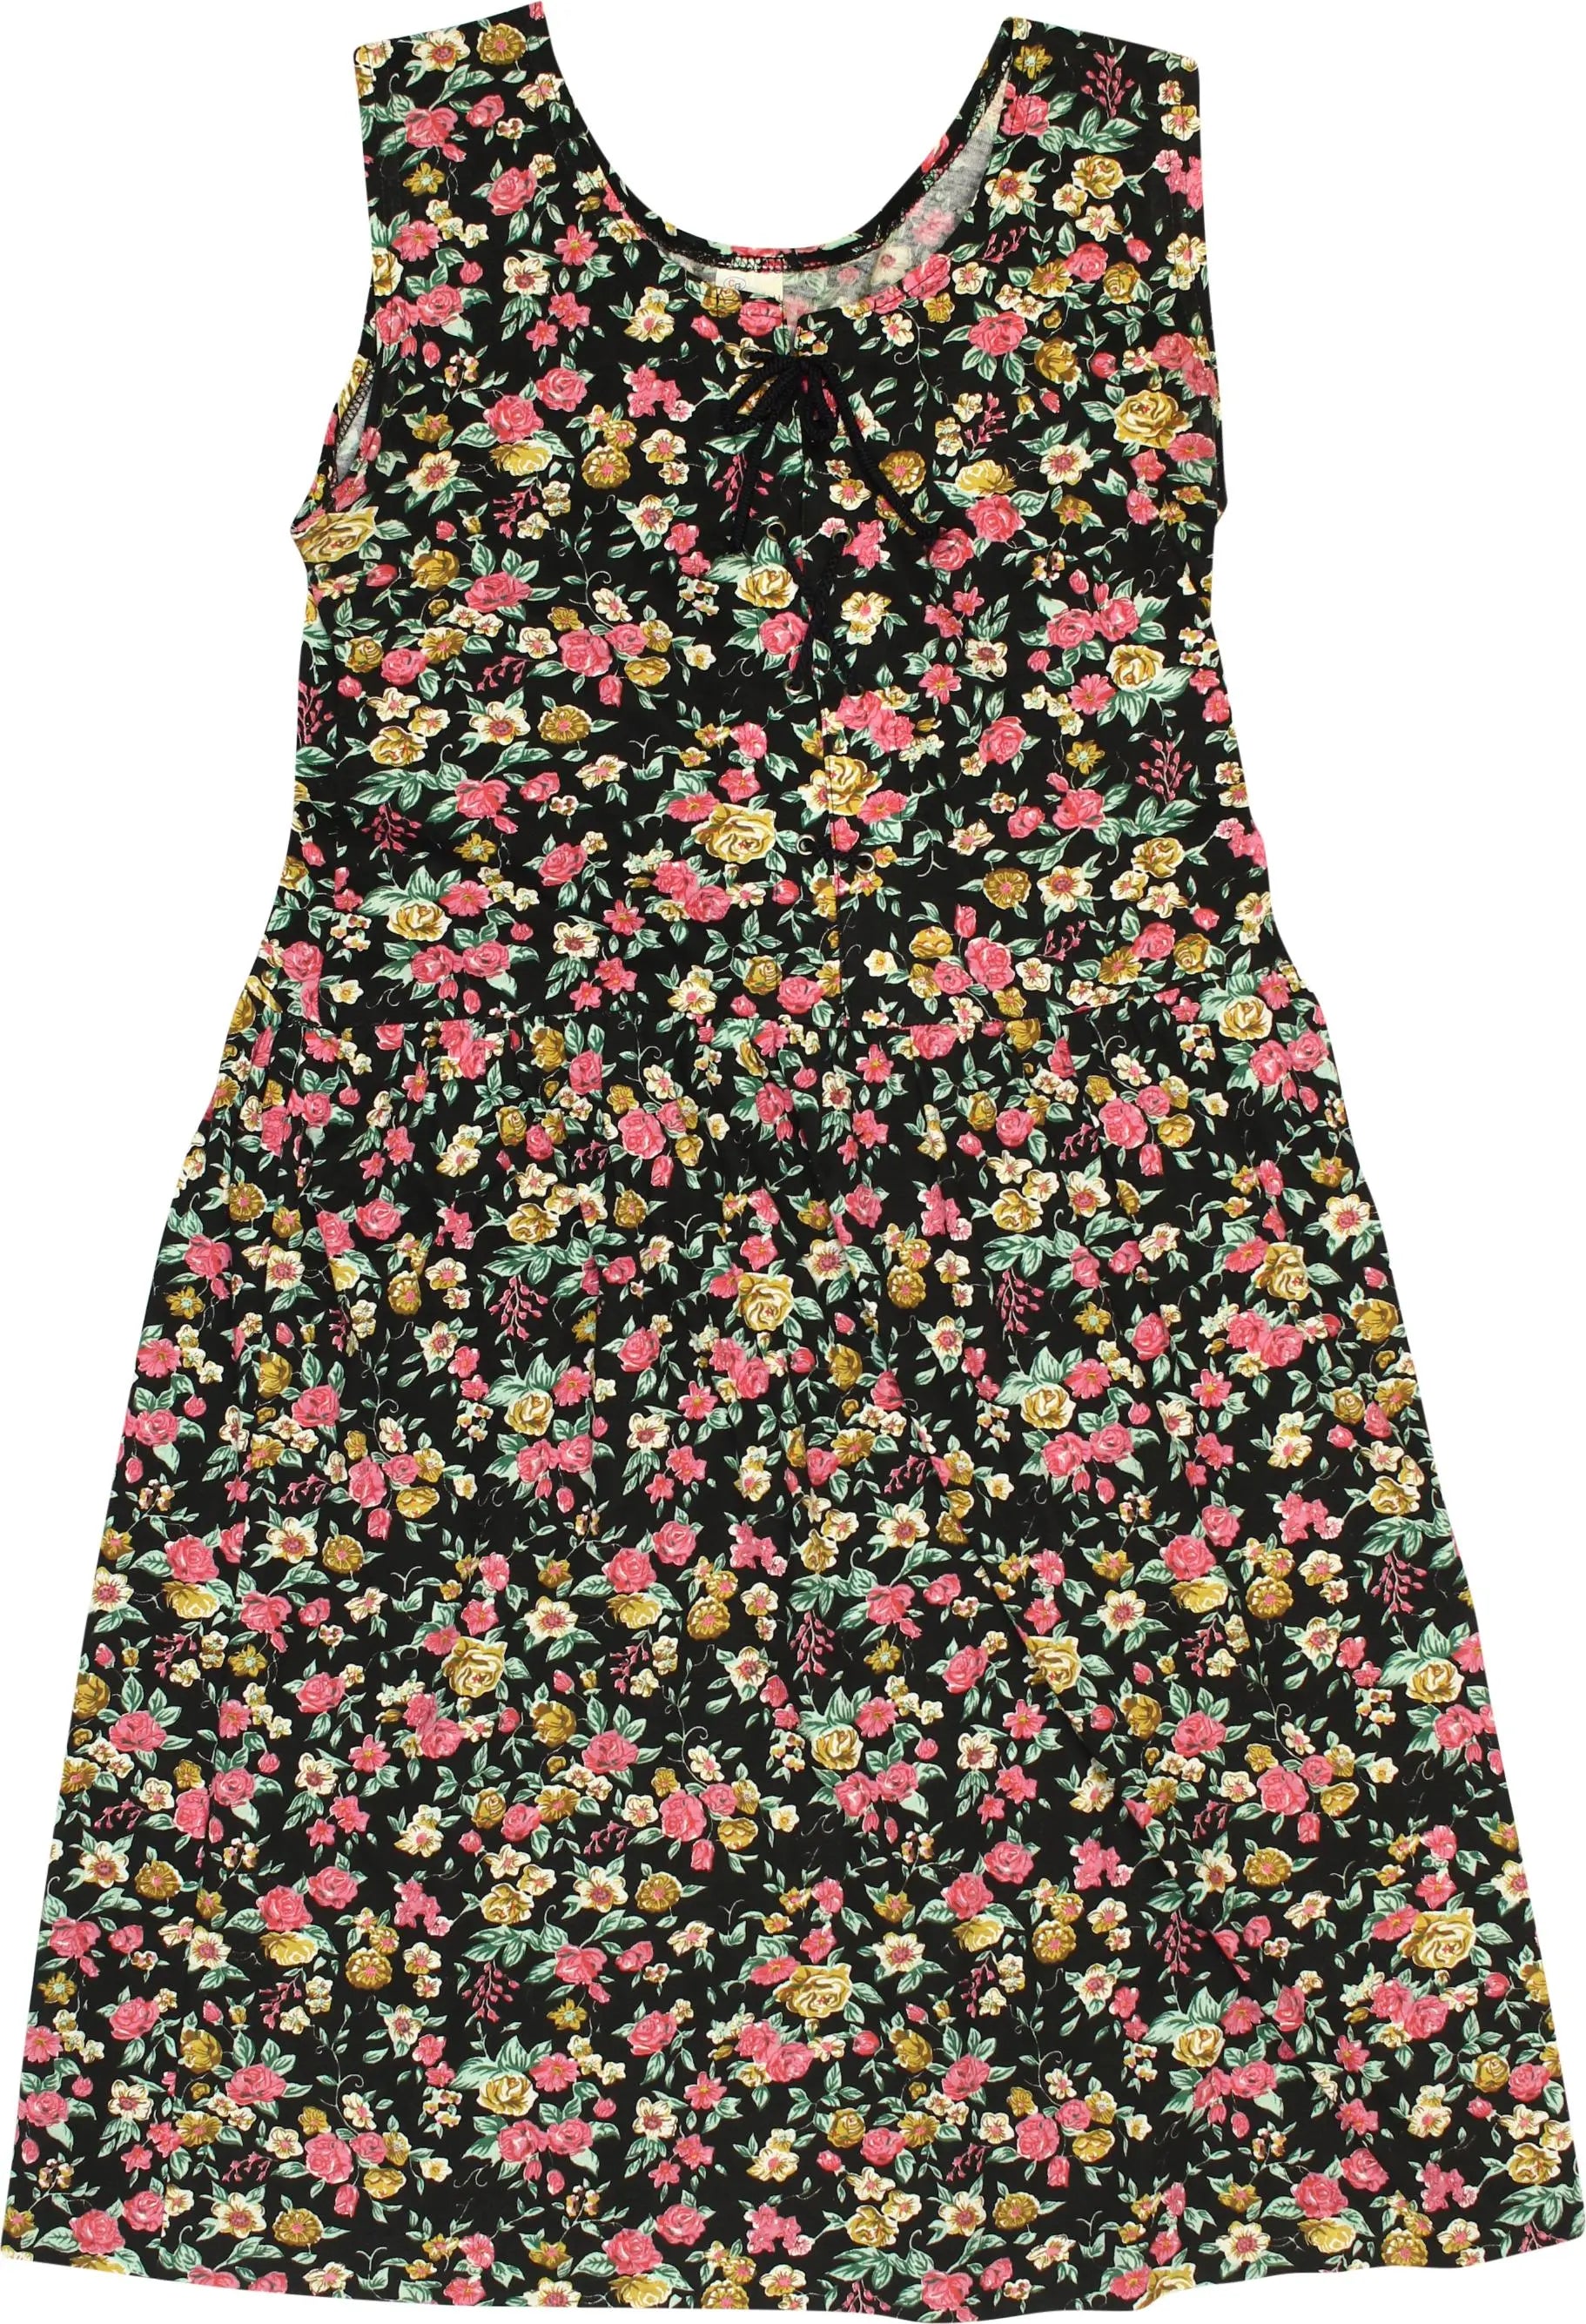 Unknown - Floral Dress- ThriftTale.com - Vintage and second handclothing